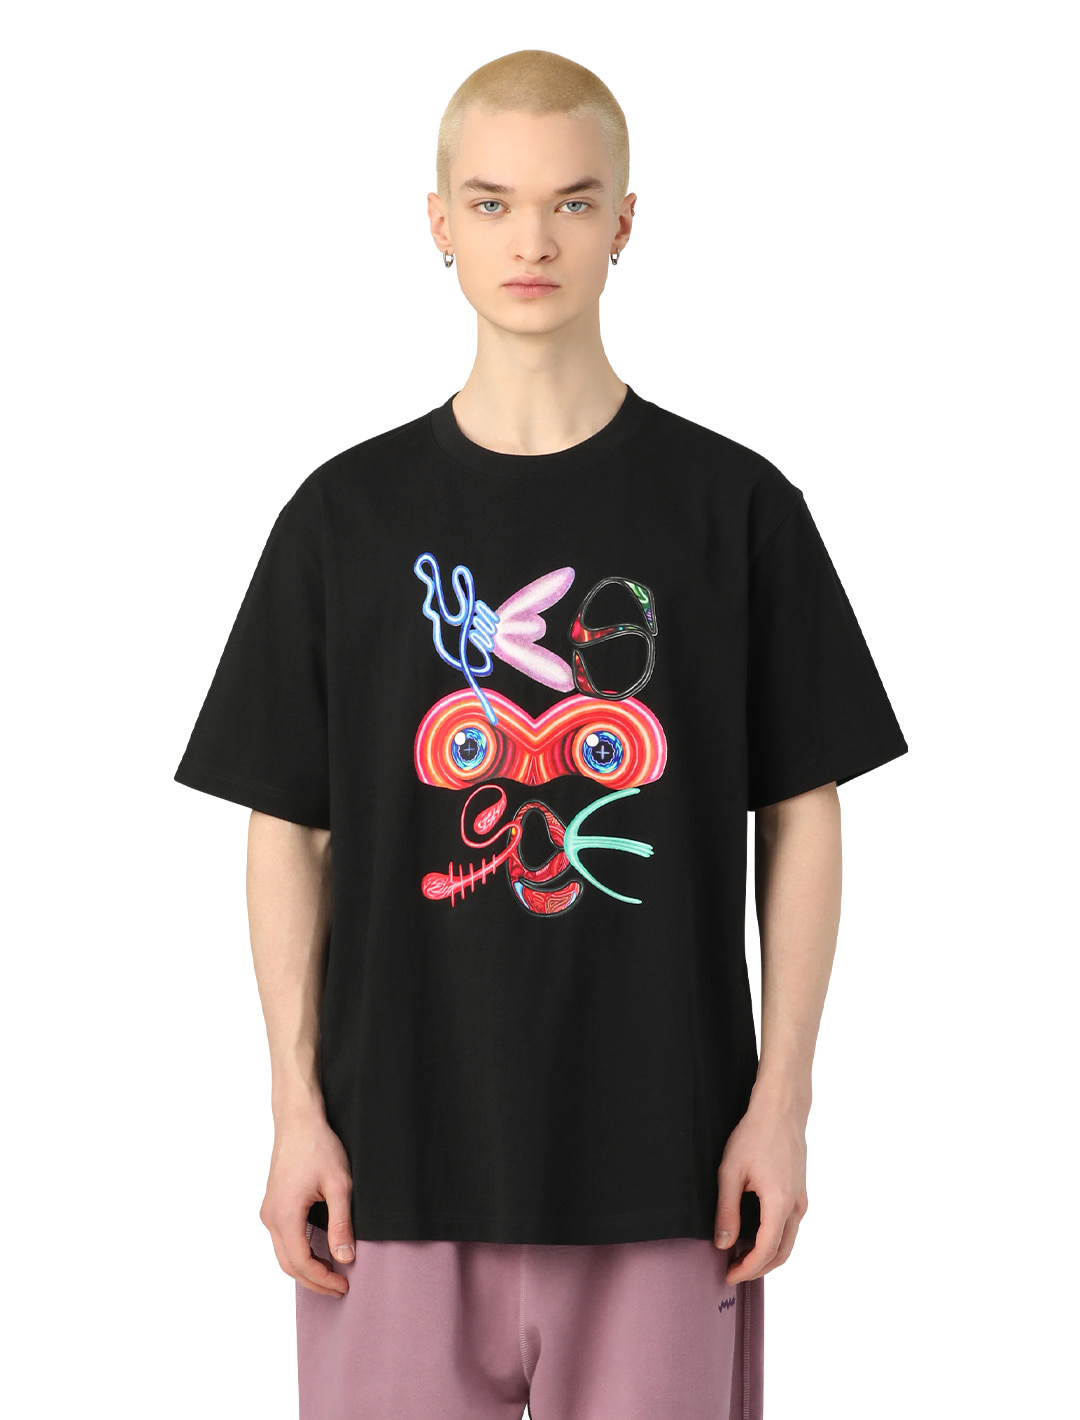 SKW face Tee Black